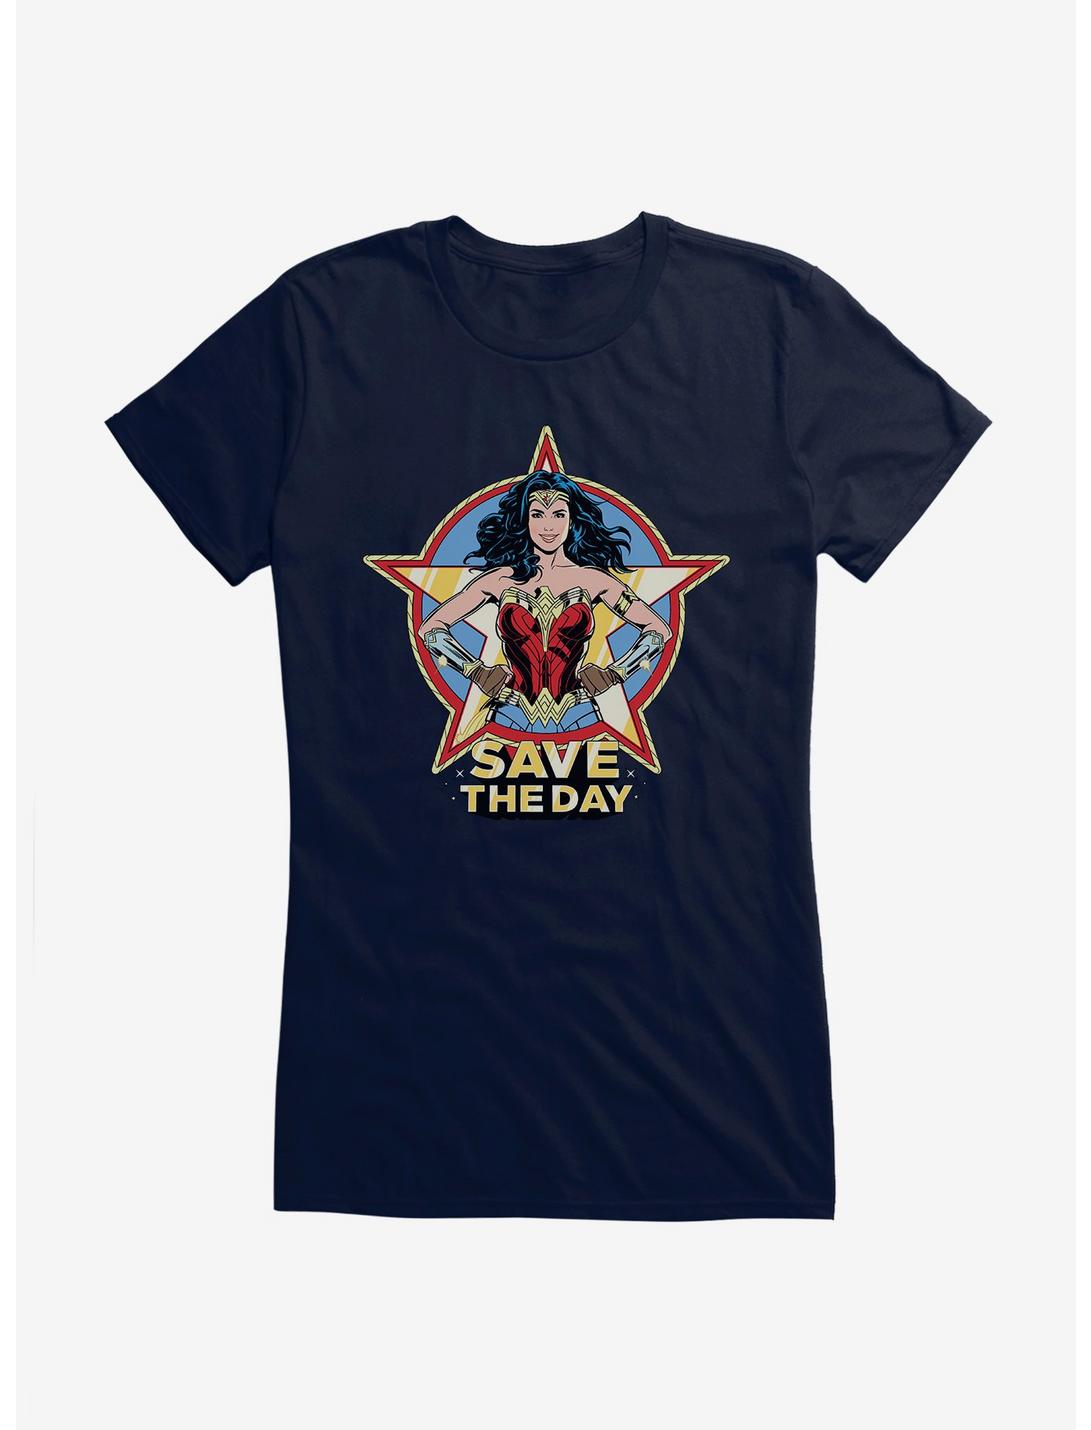 DC Comics Wonder Woman 1984 Here To Save The Day Girls T-Shirt, NAVY, hi-res